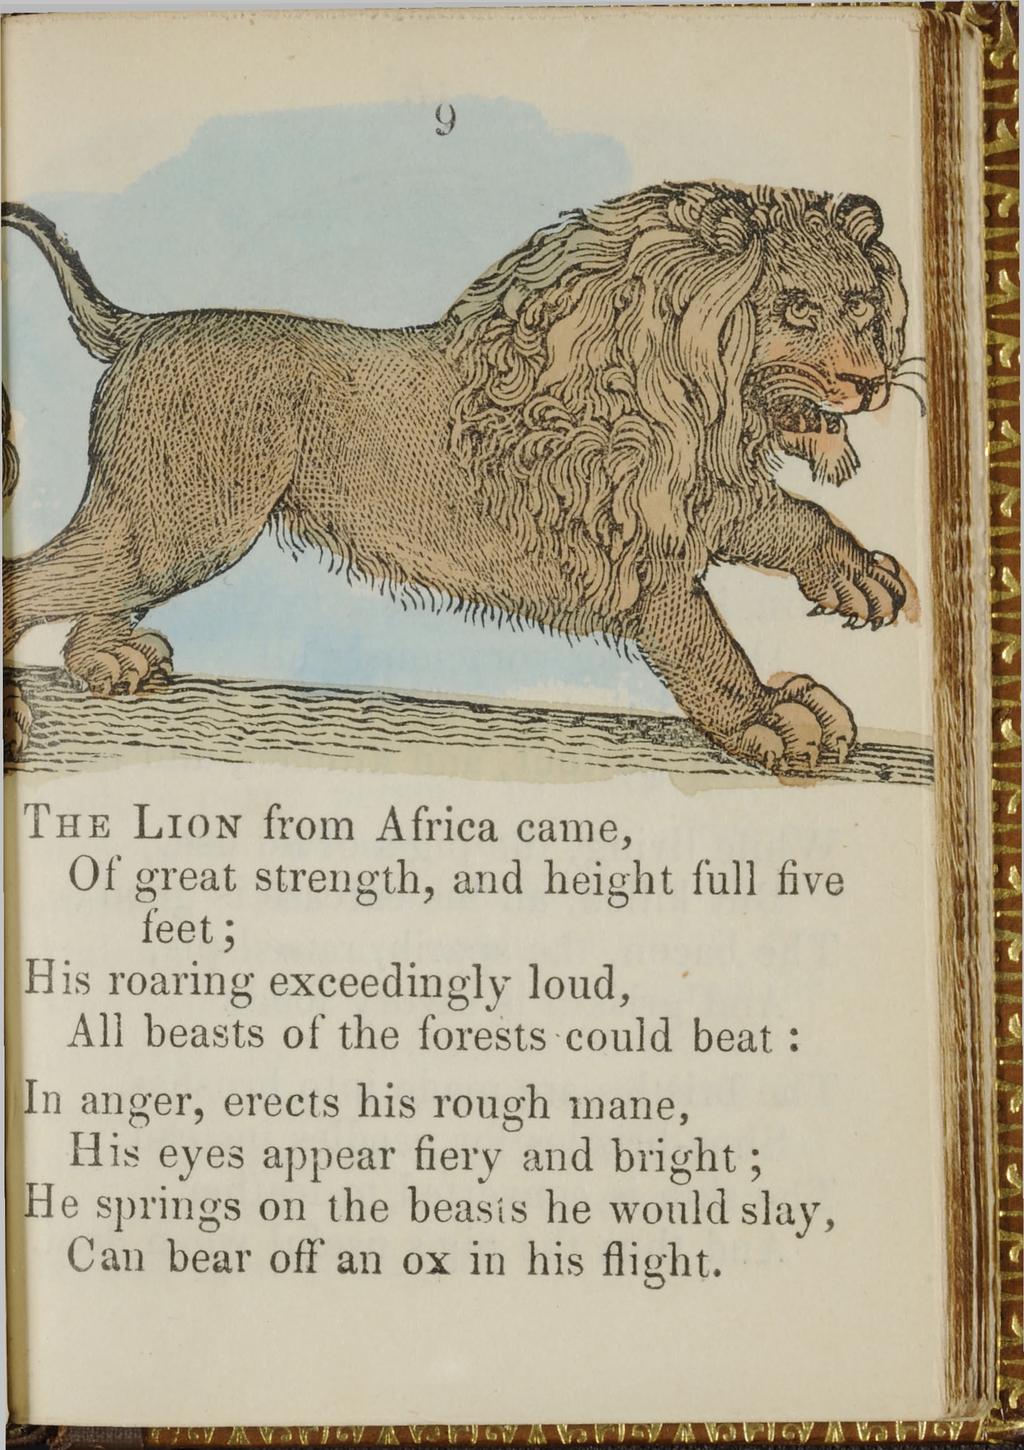 9 THE L ION from Africa came, Of great strength, and height full five feet; His roaring exceedingly loud, All beasts o f the forests could b ea